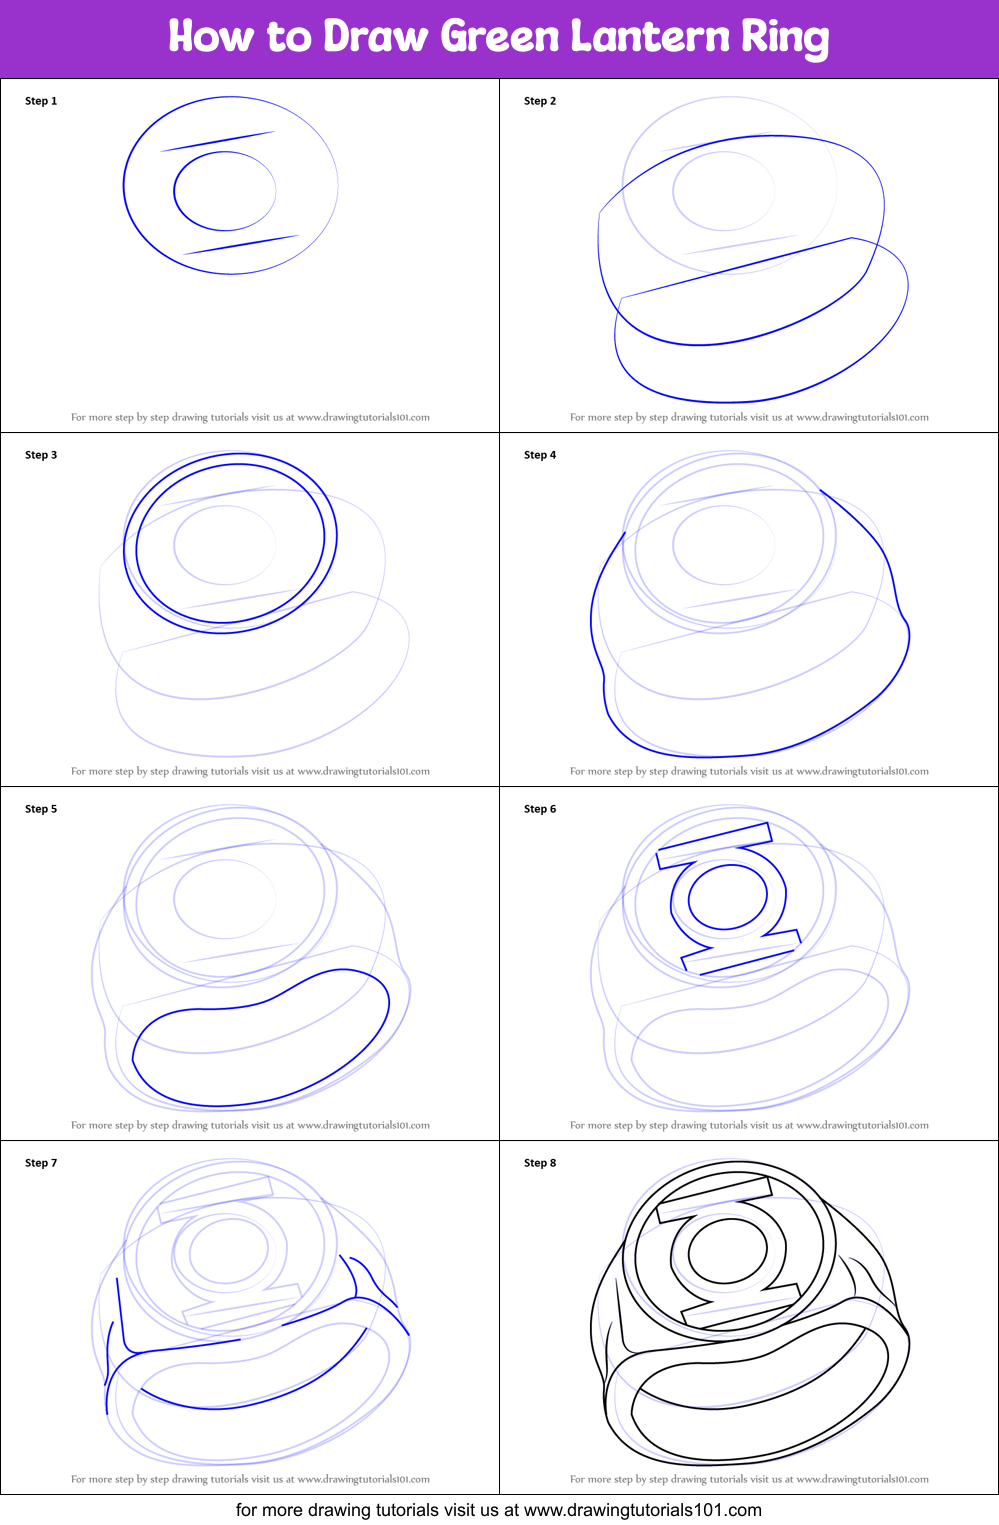 How to Draw Green Lantern Ring printable step by step